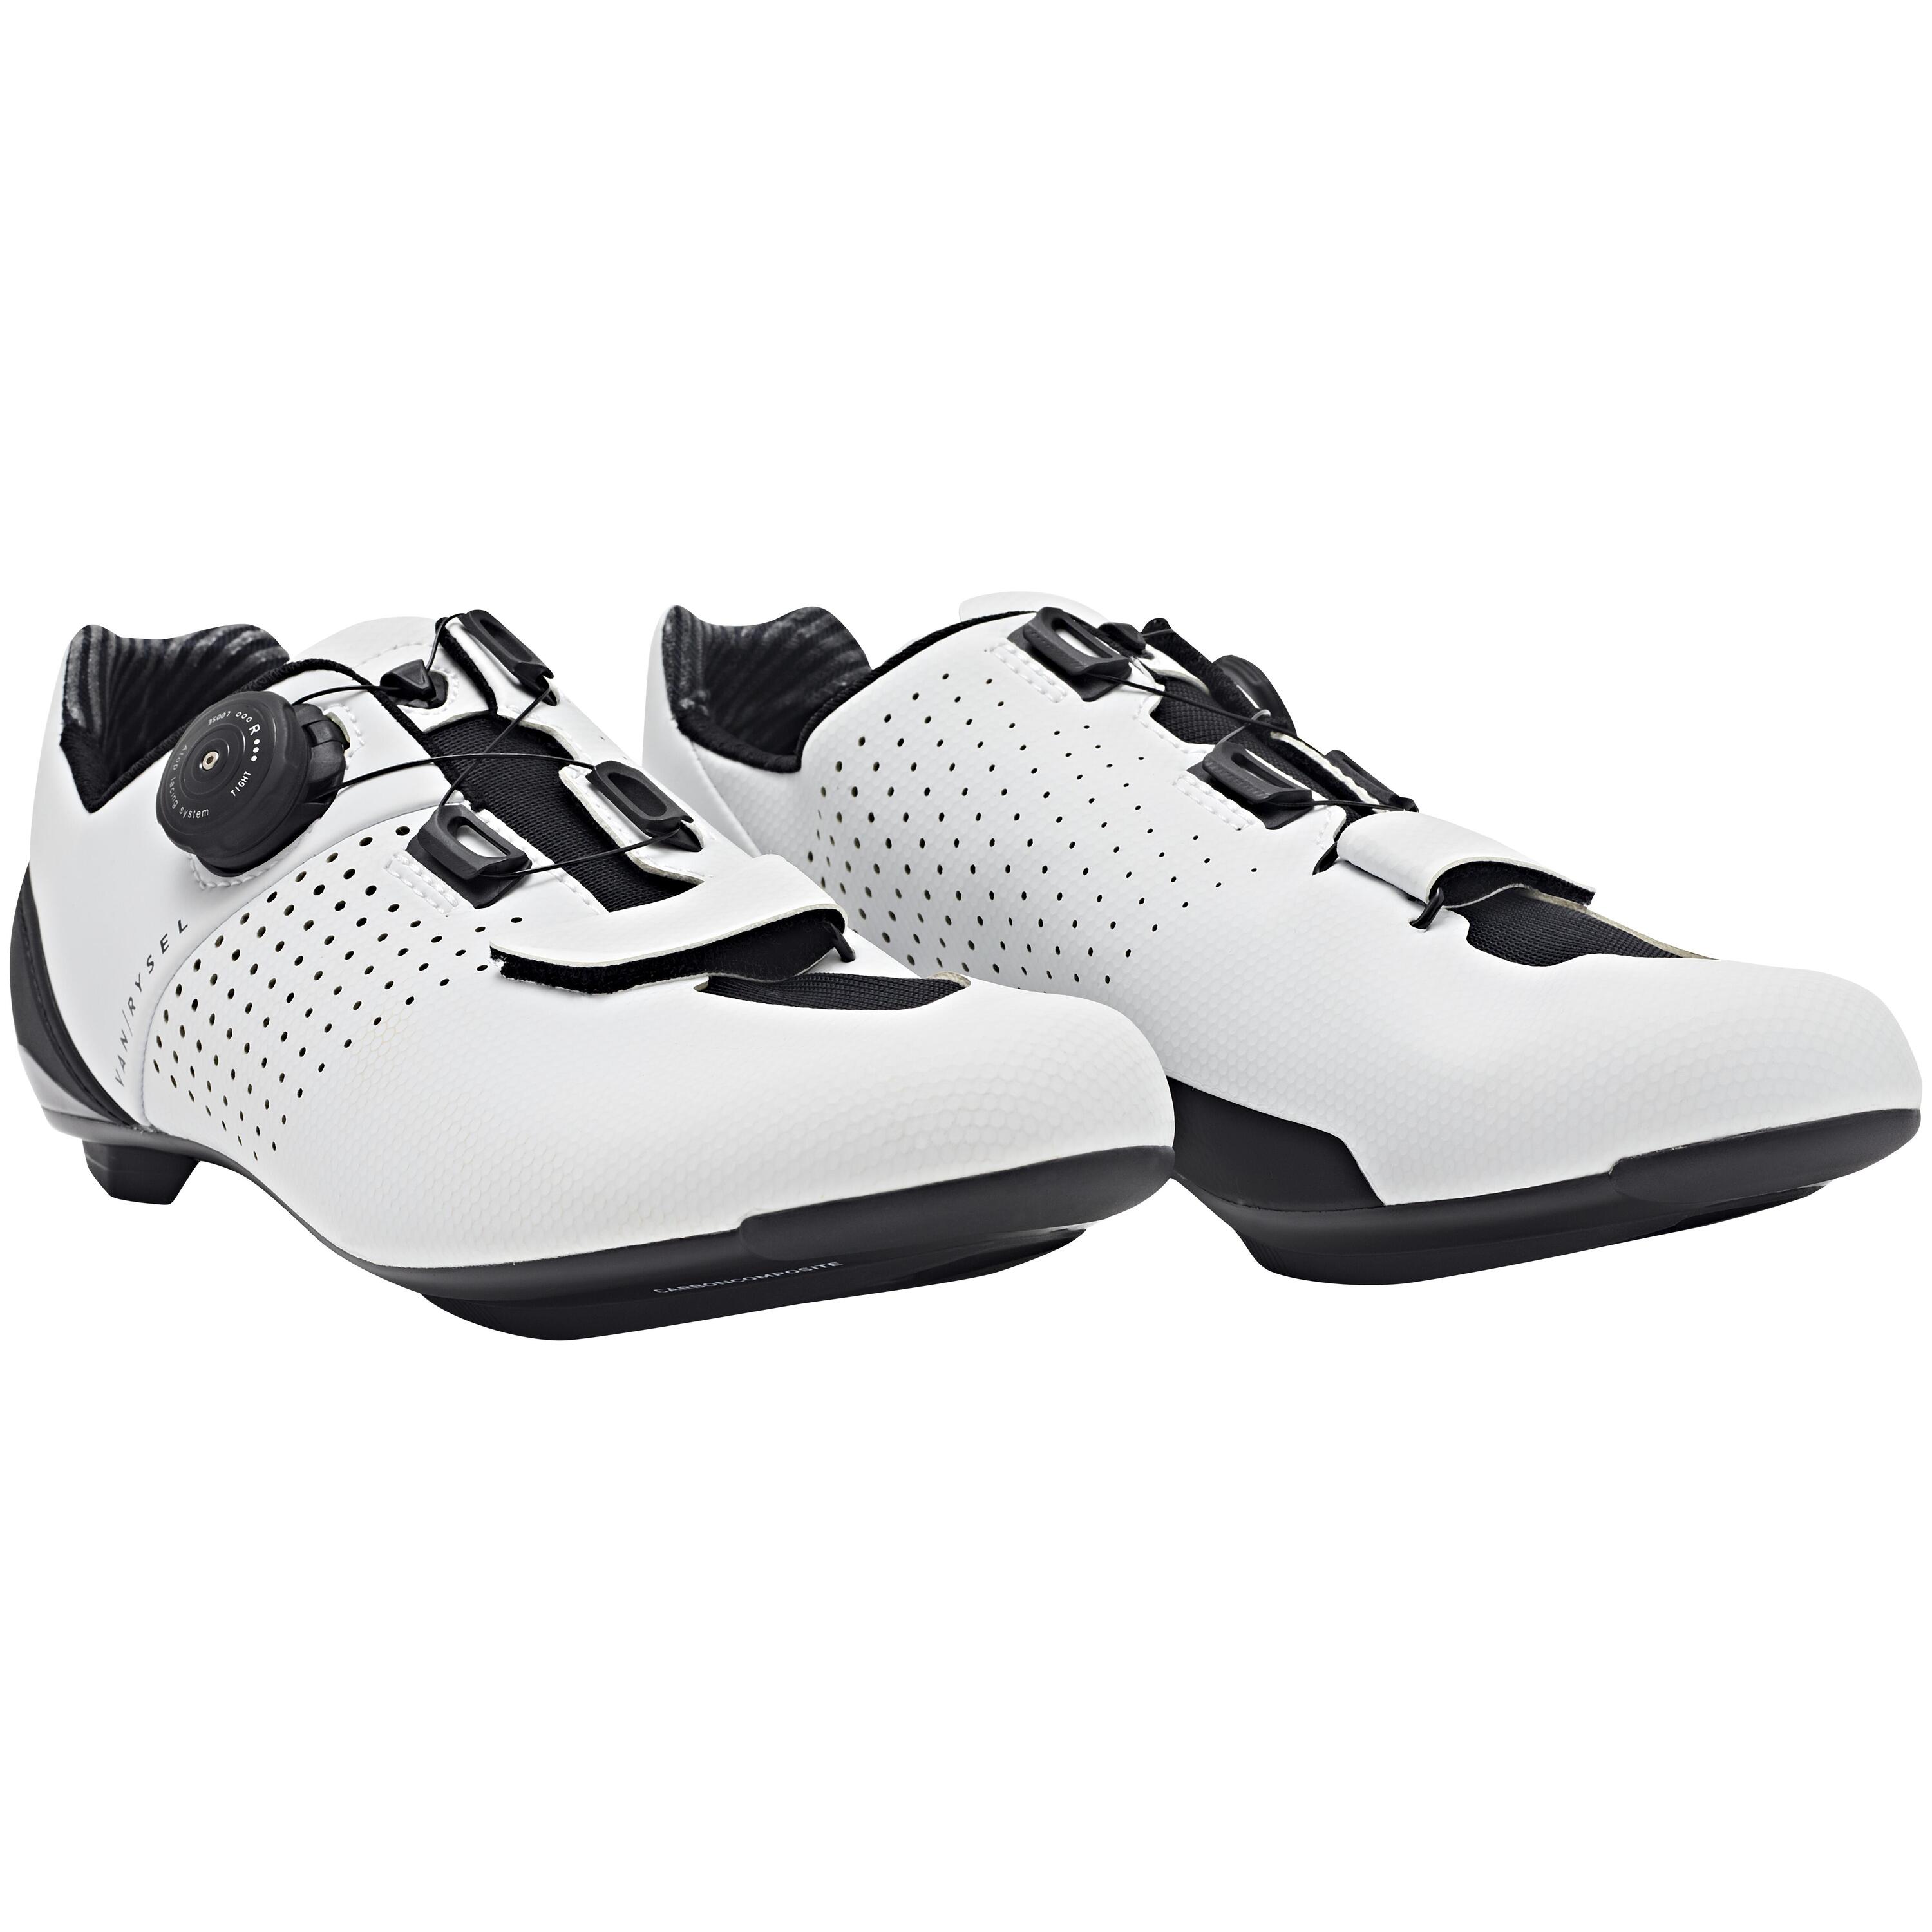 Road Cycling Shoes Road 520 - White 4/7